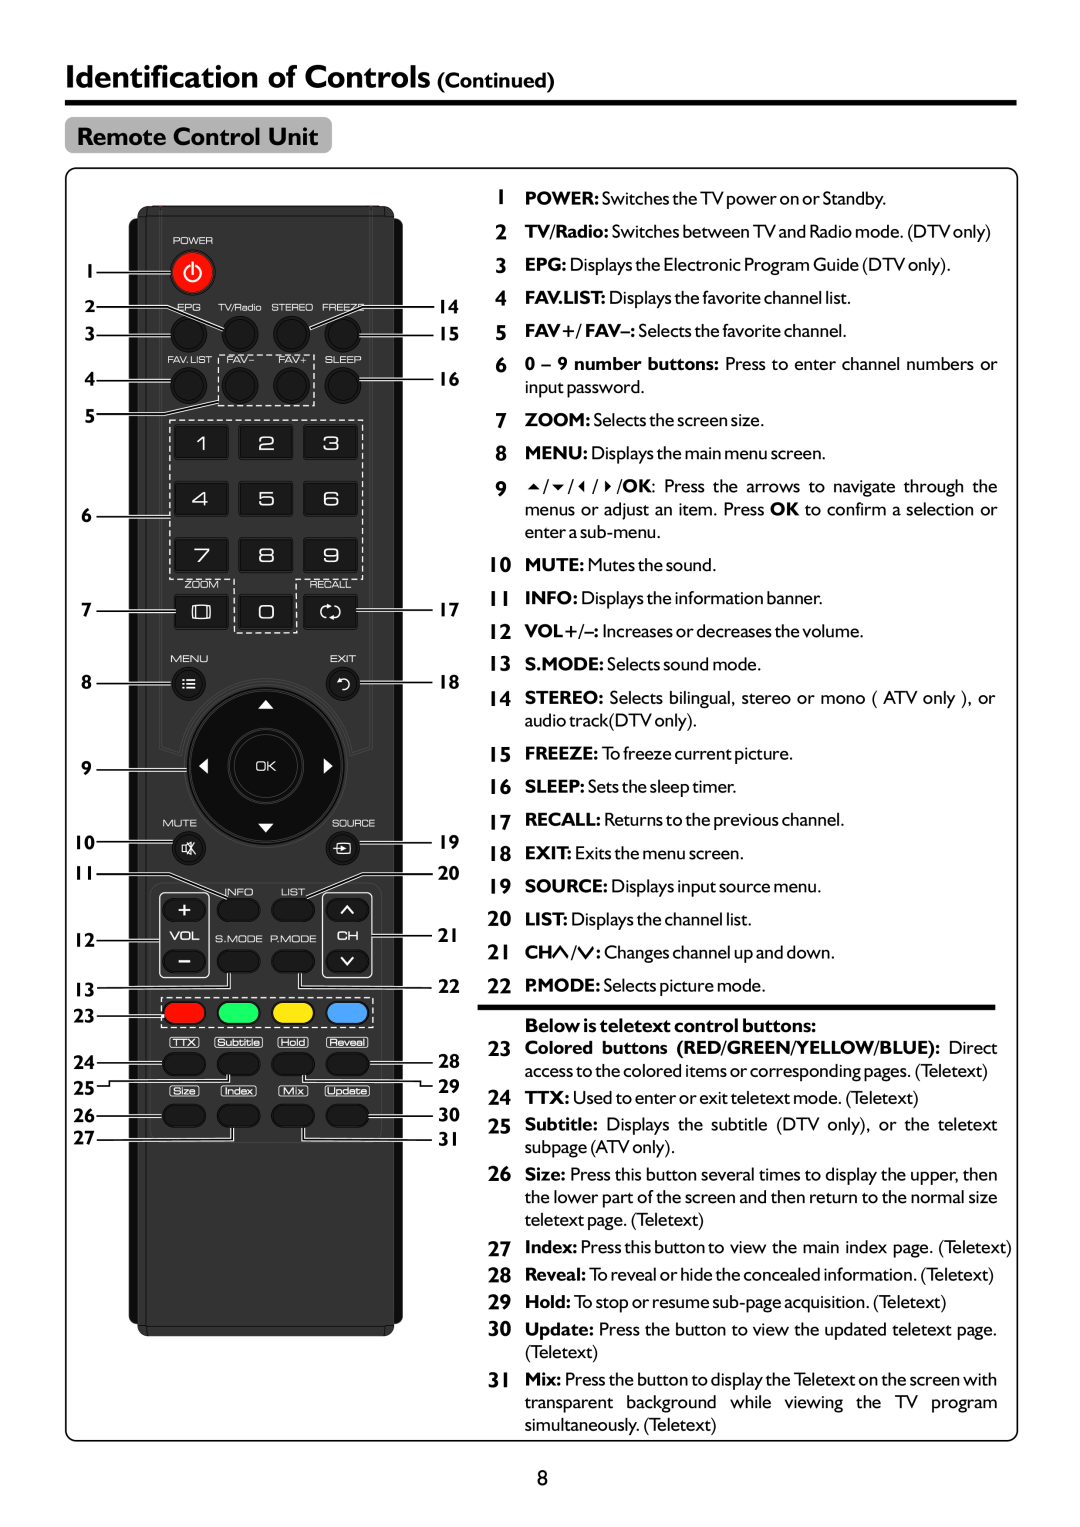 Palsonic TFTV818HD Remote Control Unit, Identification of Controls Continued, Below is teletext control buttons 